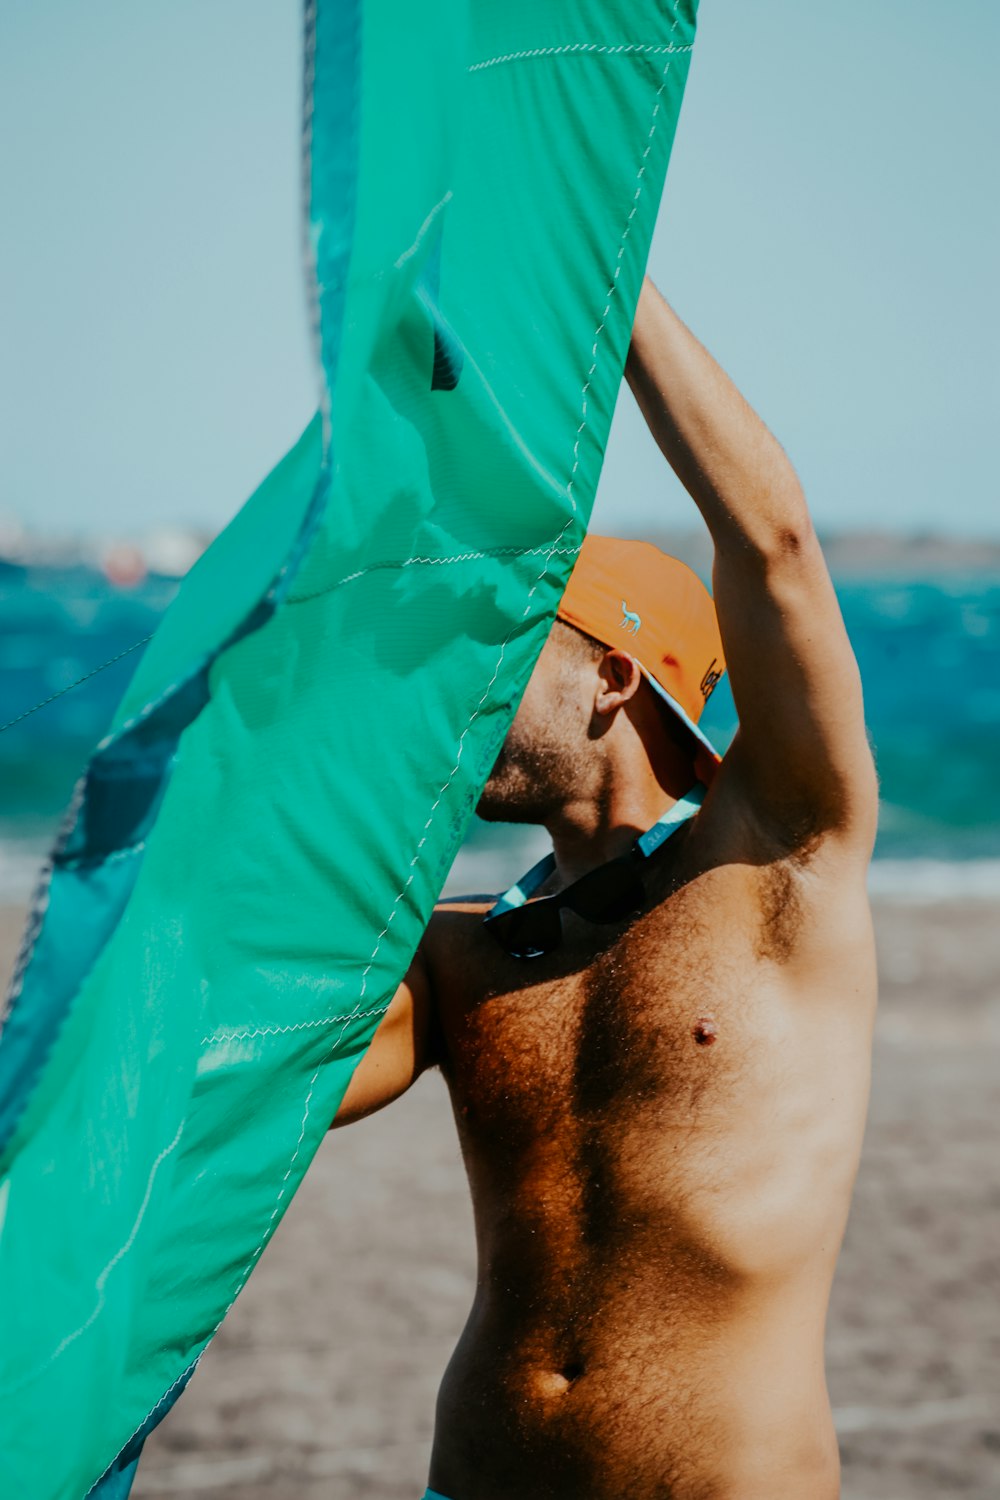 a shirtless man holding a kite on the beach